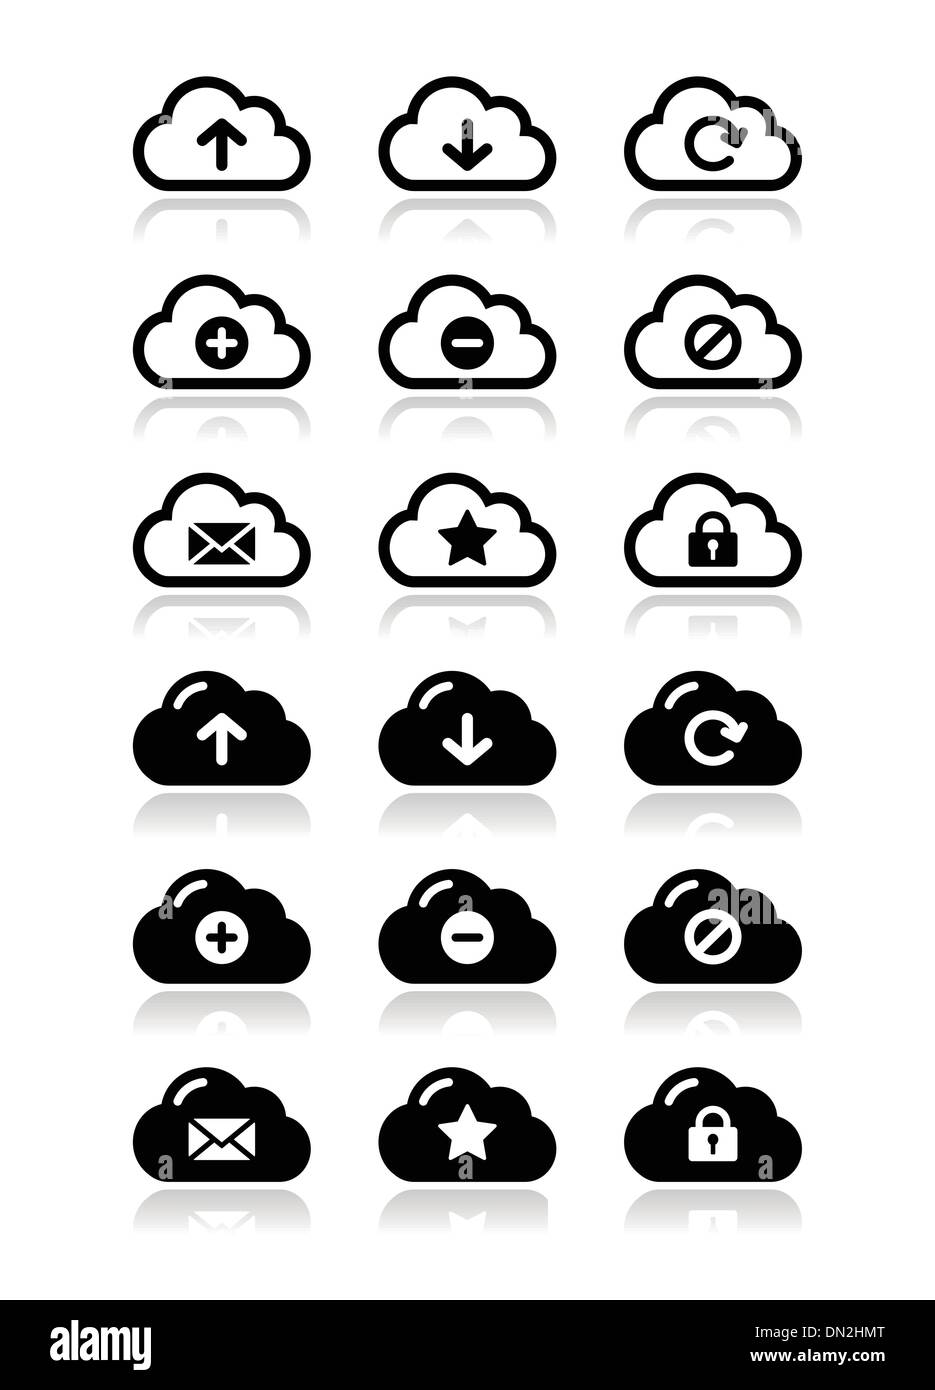 Cloud vector icons set for web Stock Vector